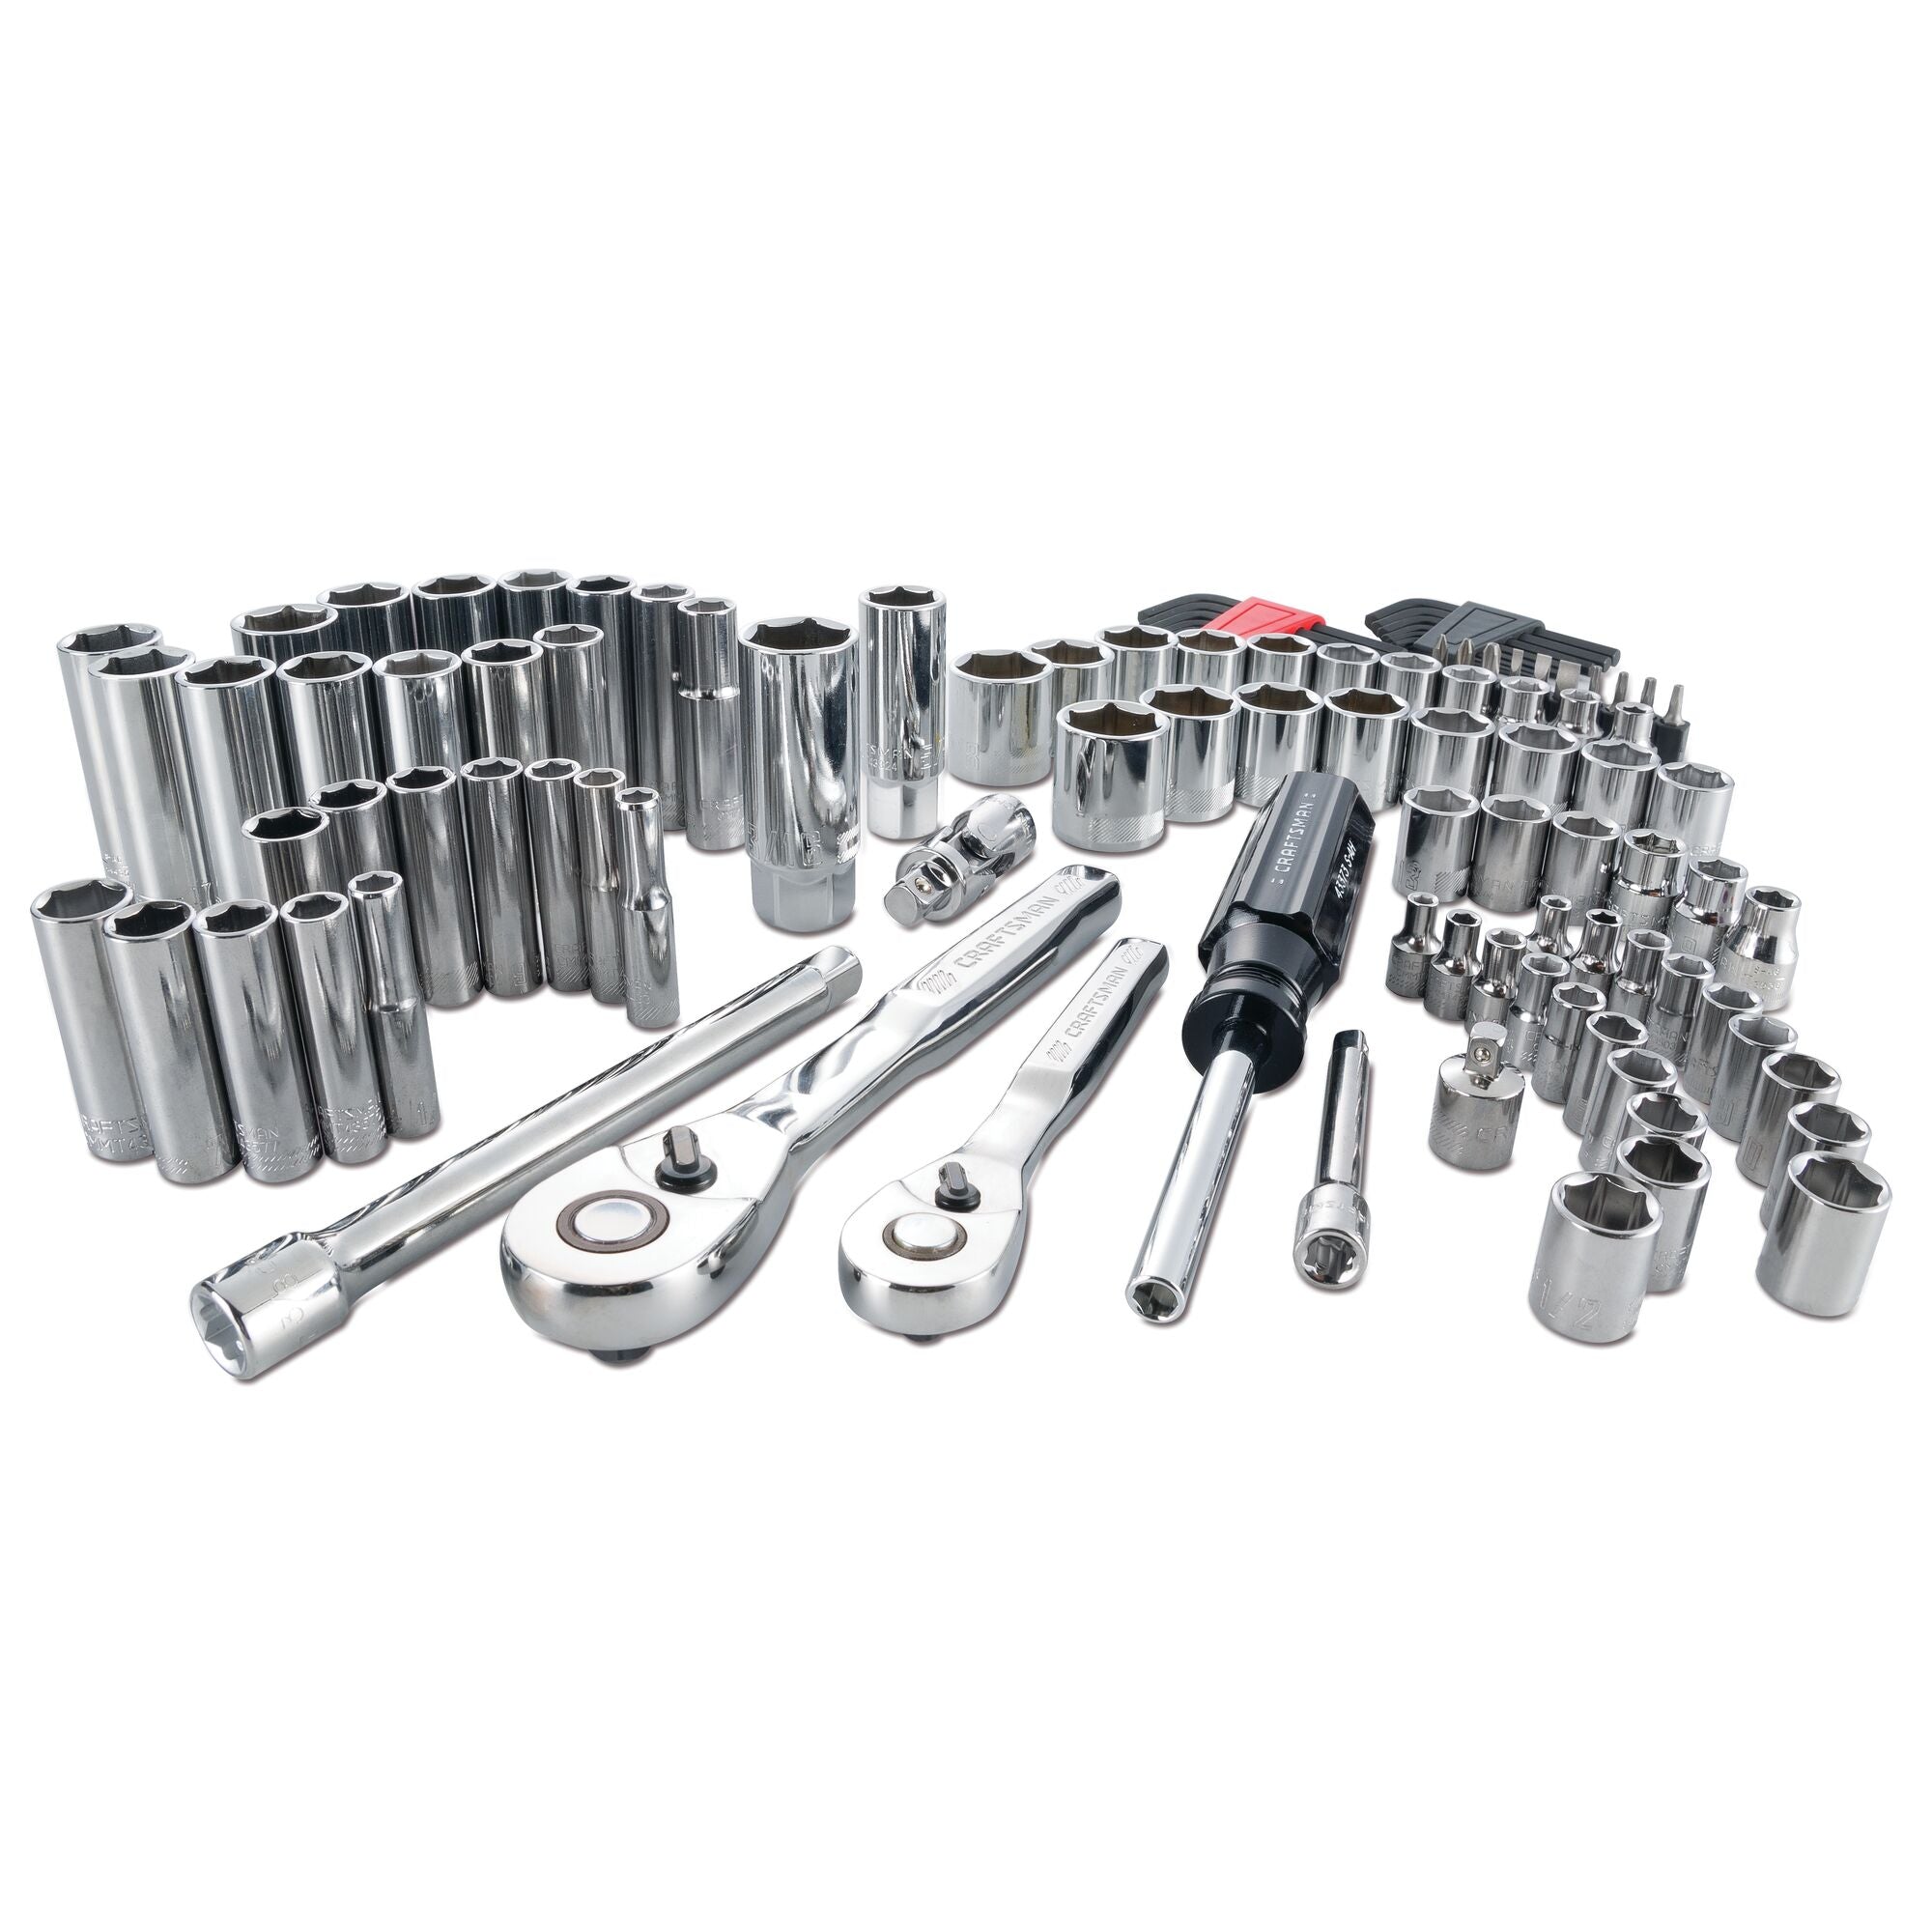 1/4-in And 3/8-in Drive Mechanics Tool Set (105 pc) | CRAFTSMAN